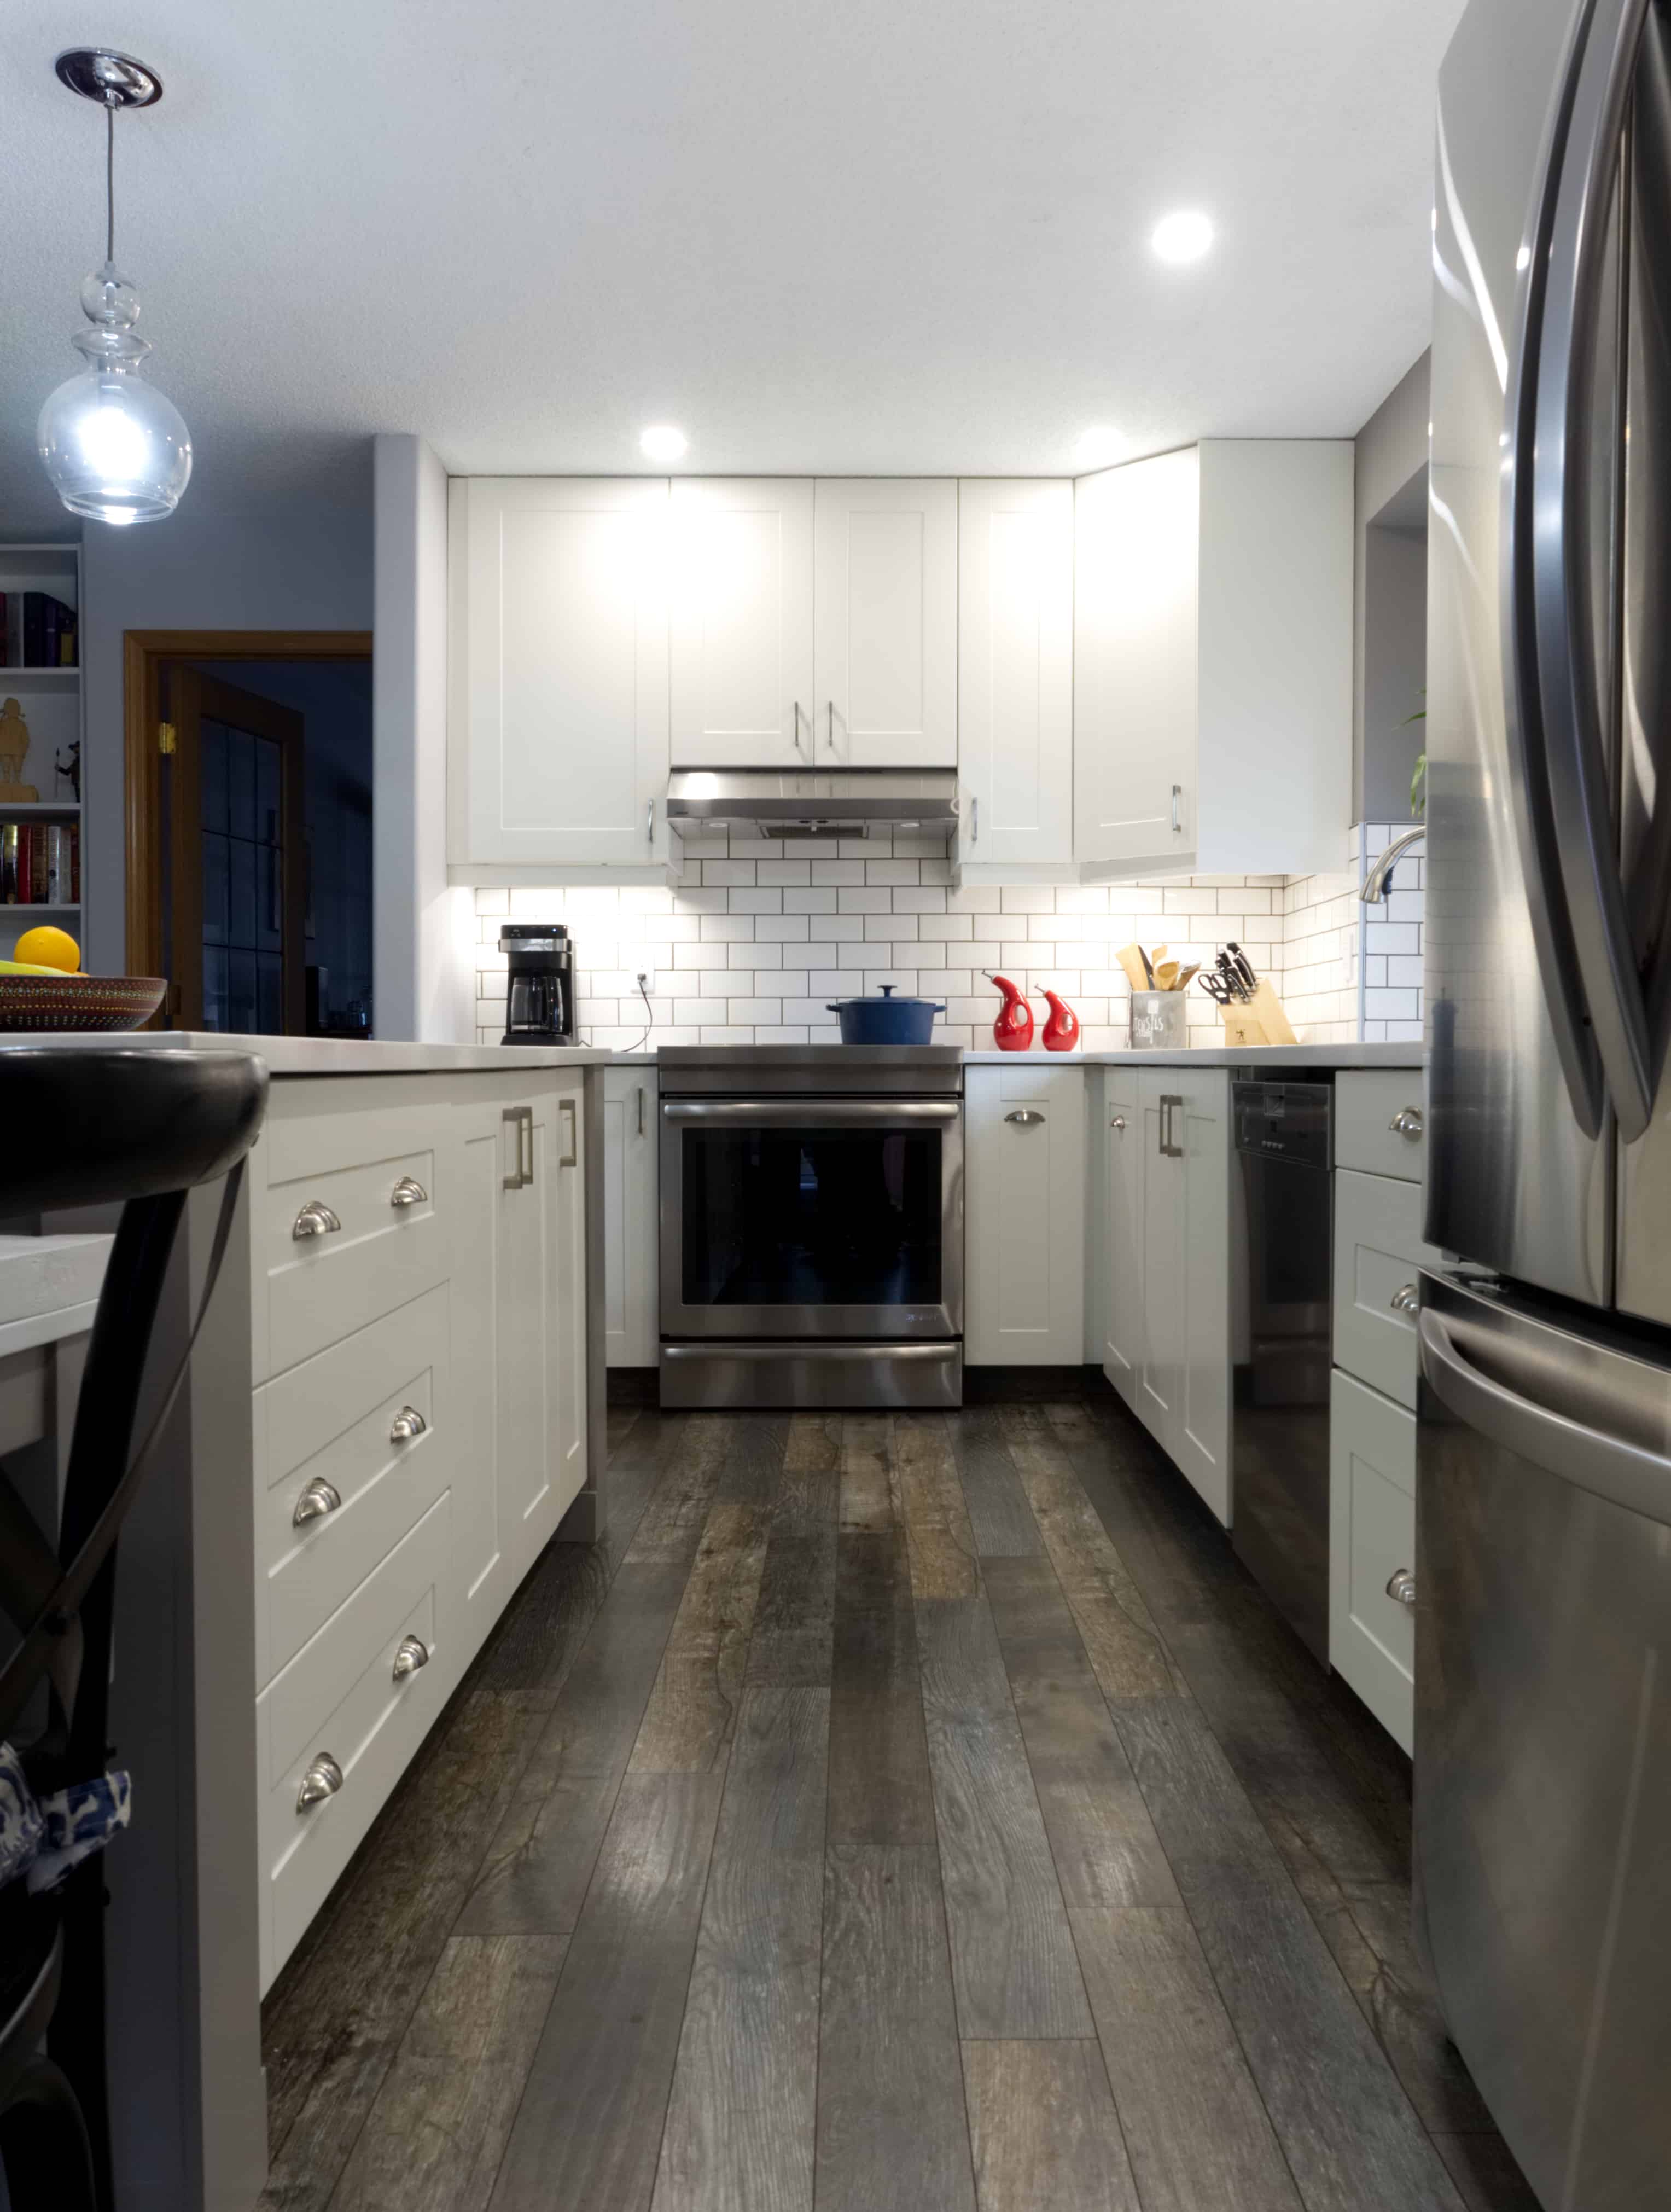 Ikea Kitchen Review Pros Cons And, Ikea White Kitchen Cabinets Reviews